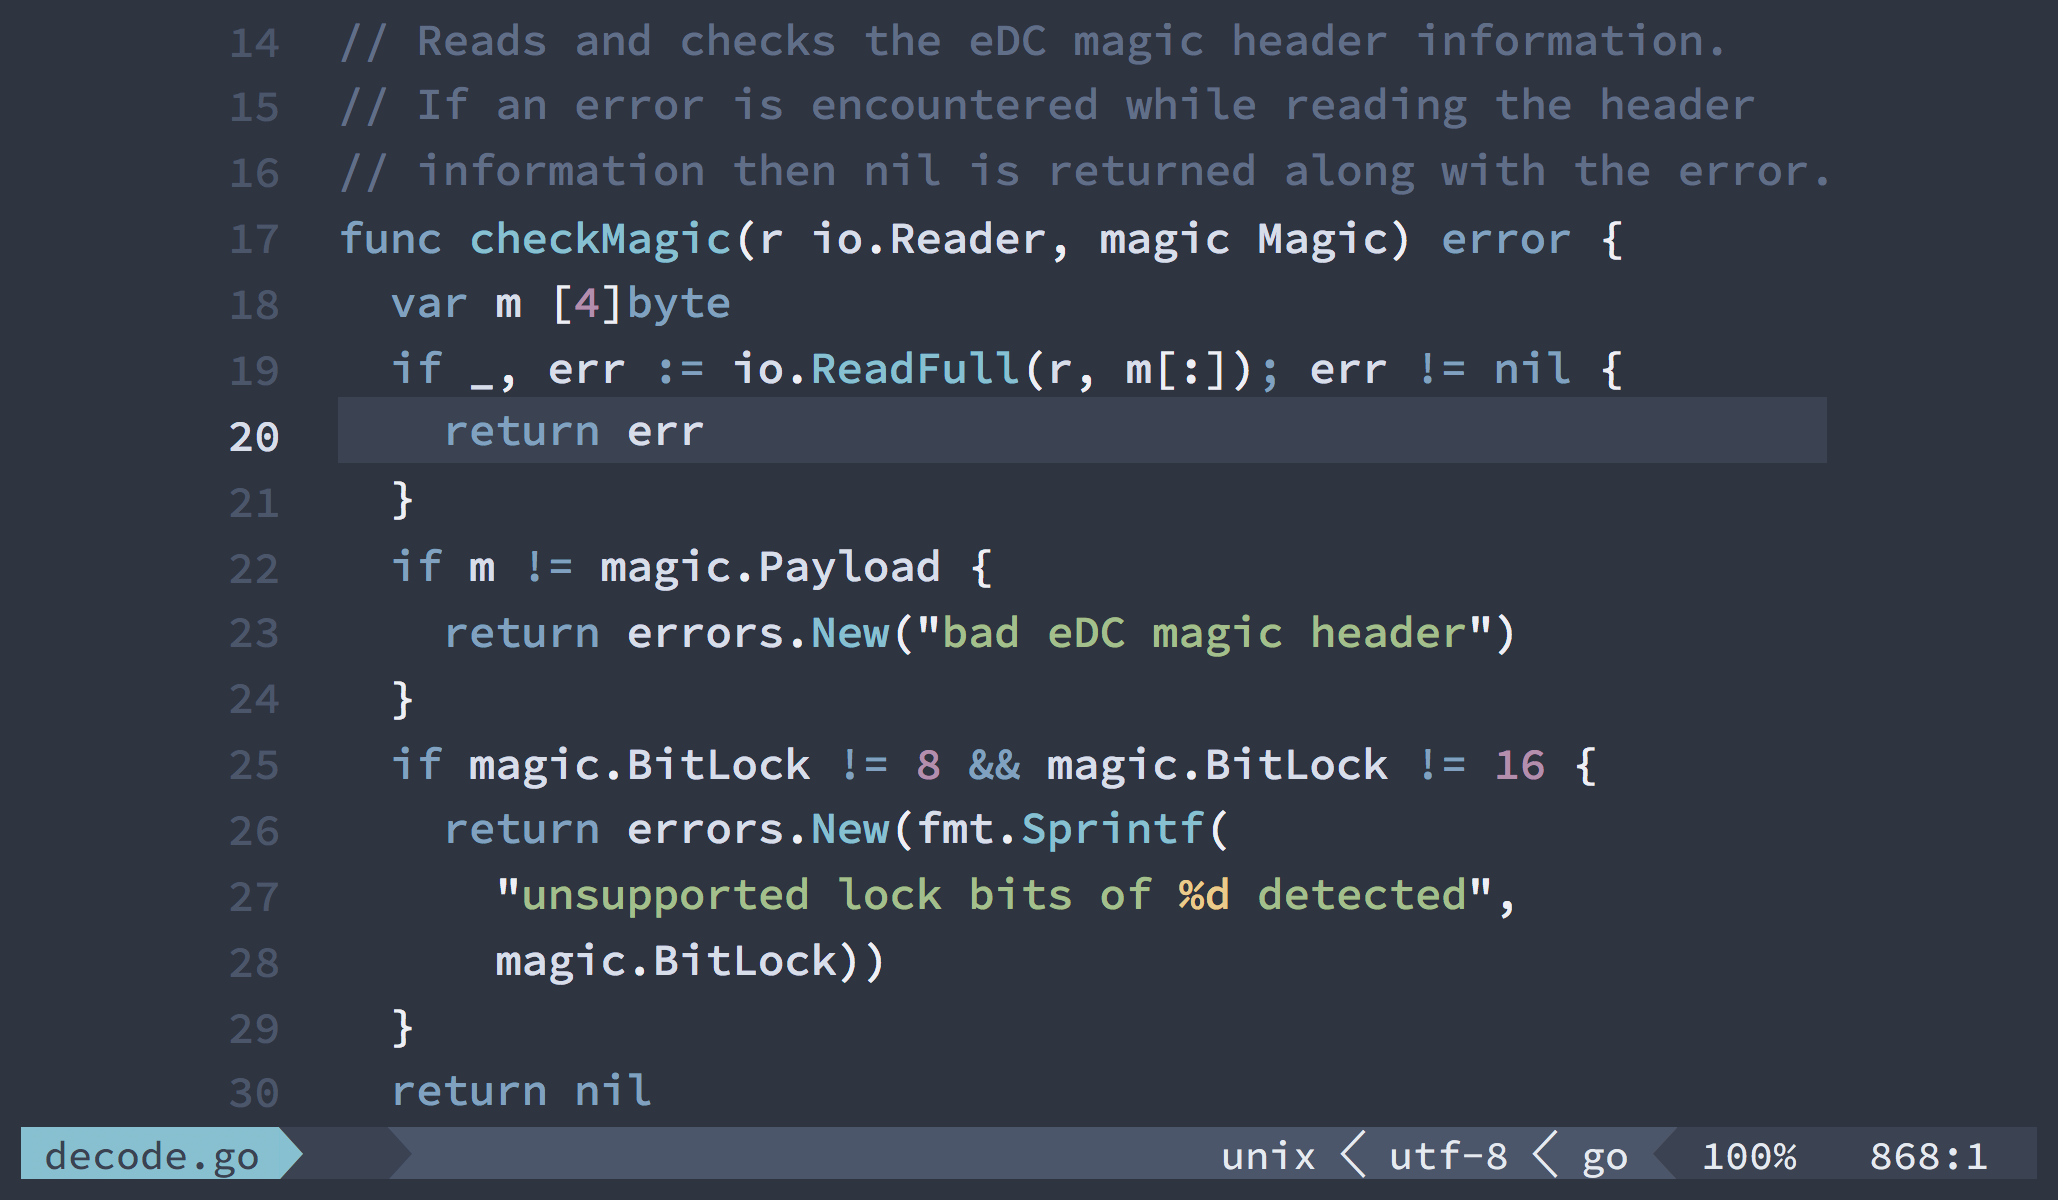 Screenshot showing Emacs in terminal mode with a Go function to check for magic file header information